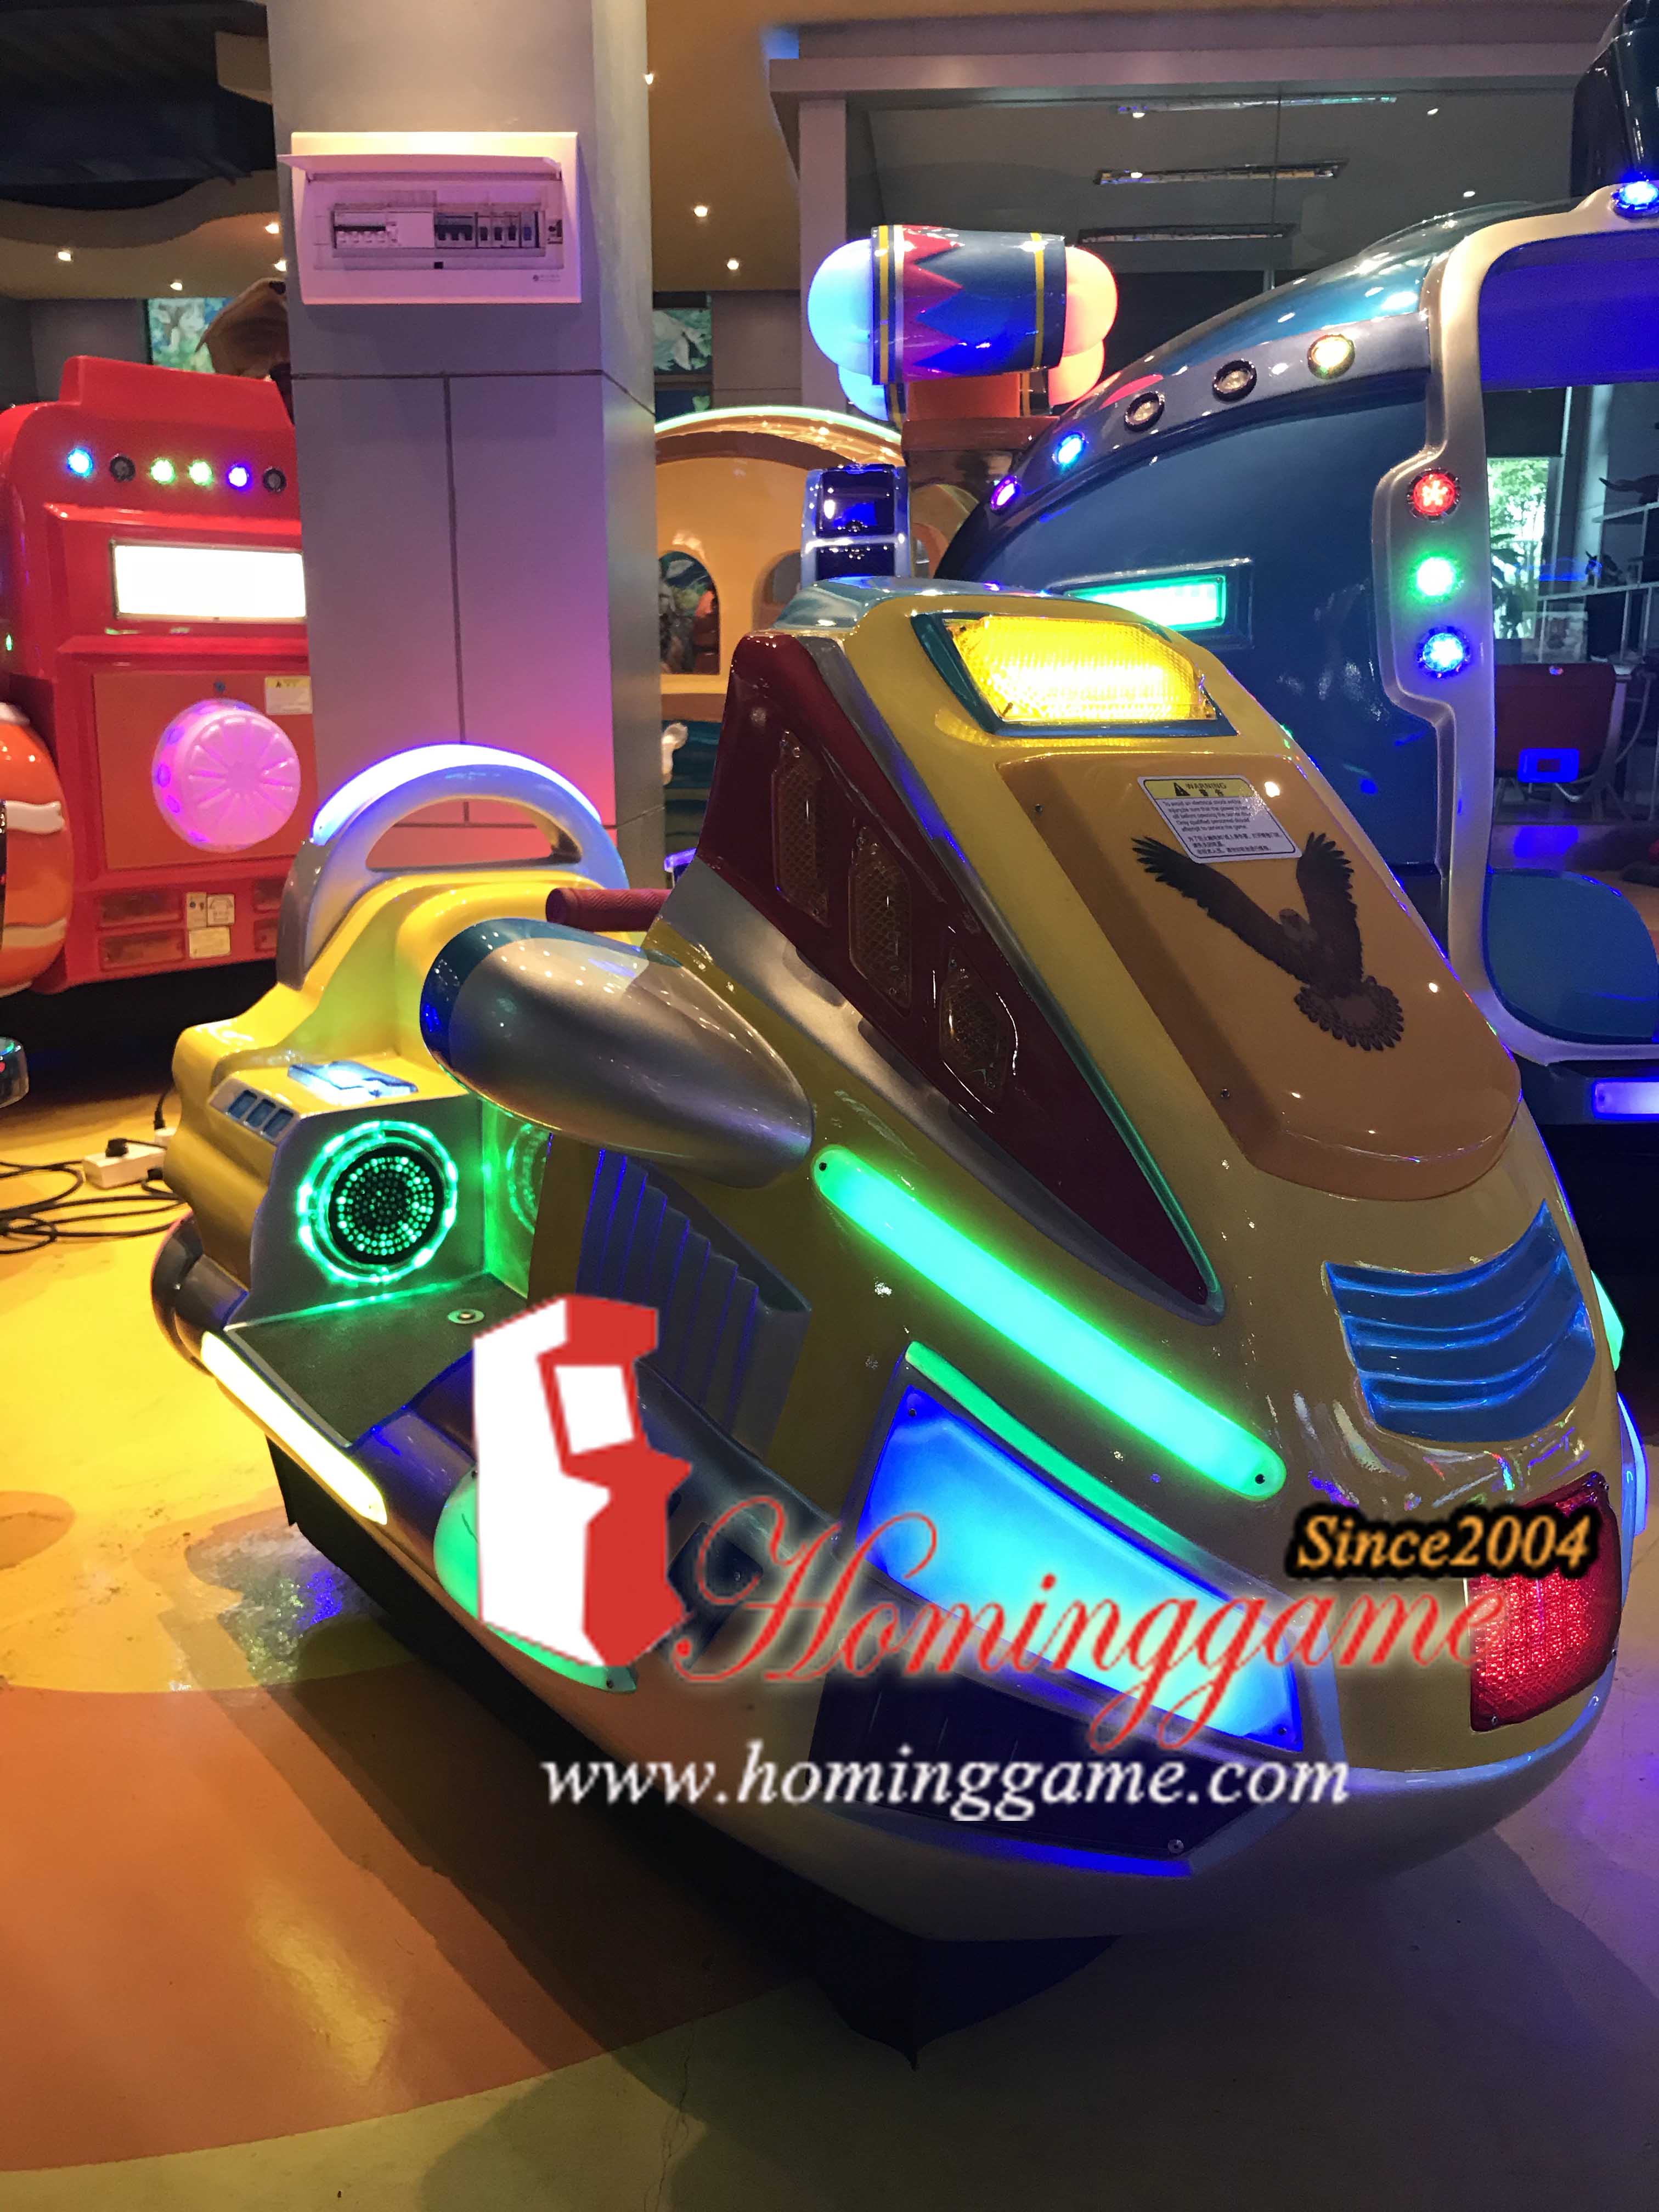 HomingGame Mini Jet skiing Coin Operated Kiddie rides,Coin Operated  Kiddie Ride Game Equipment,kiddie Sub Arcade RidesKiddie Boat,Children Rides,Arcade Rides,Coin Operated Kiddei Rides,Amusement park rides,Kids Rides,Game Machine,Arcade Game Machine,Coin Operated Game Machine,Amusement Park Game Equipment,Entertainment Game Machine,Electrical Slot Game Machine,Indoor Game Machine,Kids Game Center Game Machine,Game Equipment